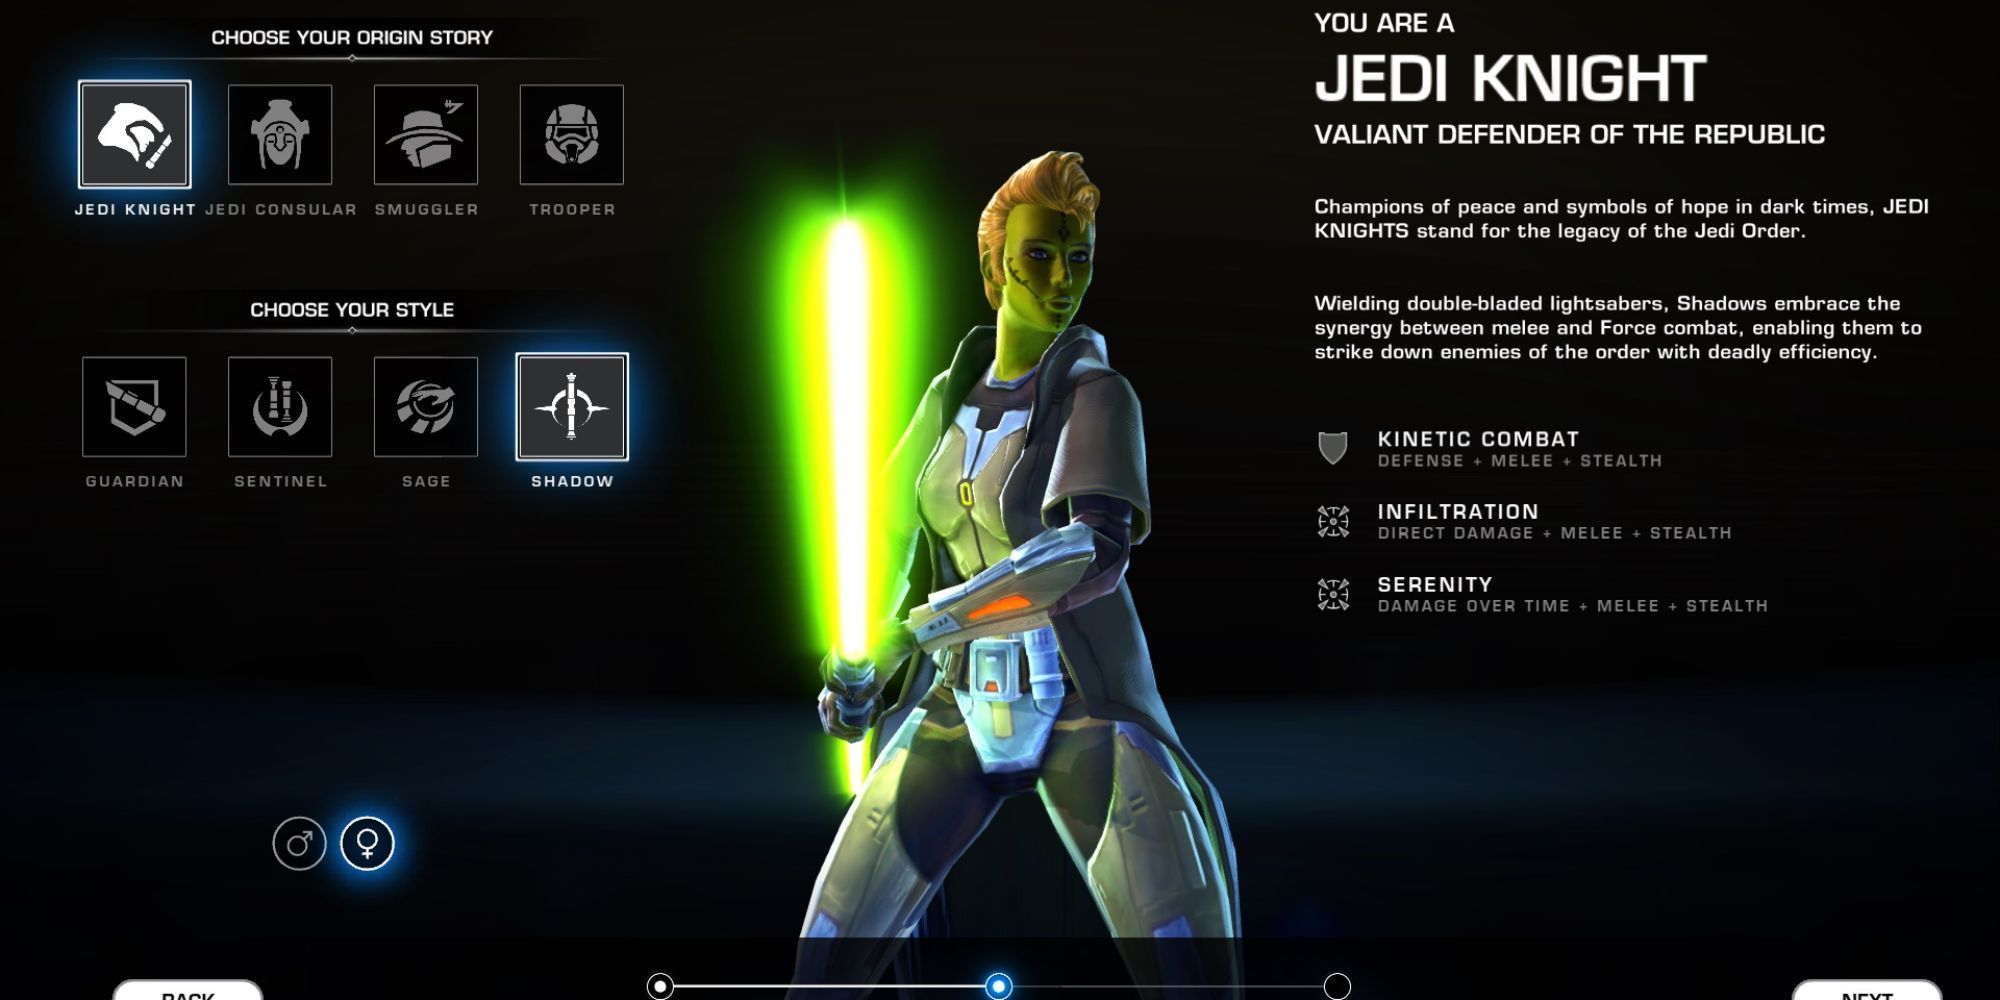 A player selecting to play as a Jedi Knight in Star Wars: The Old Republic